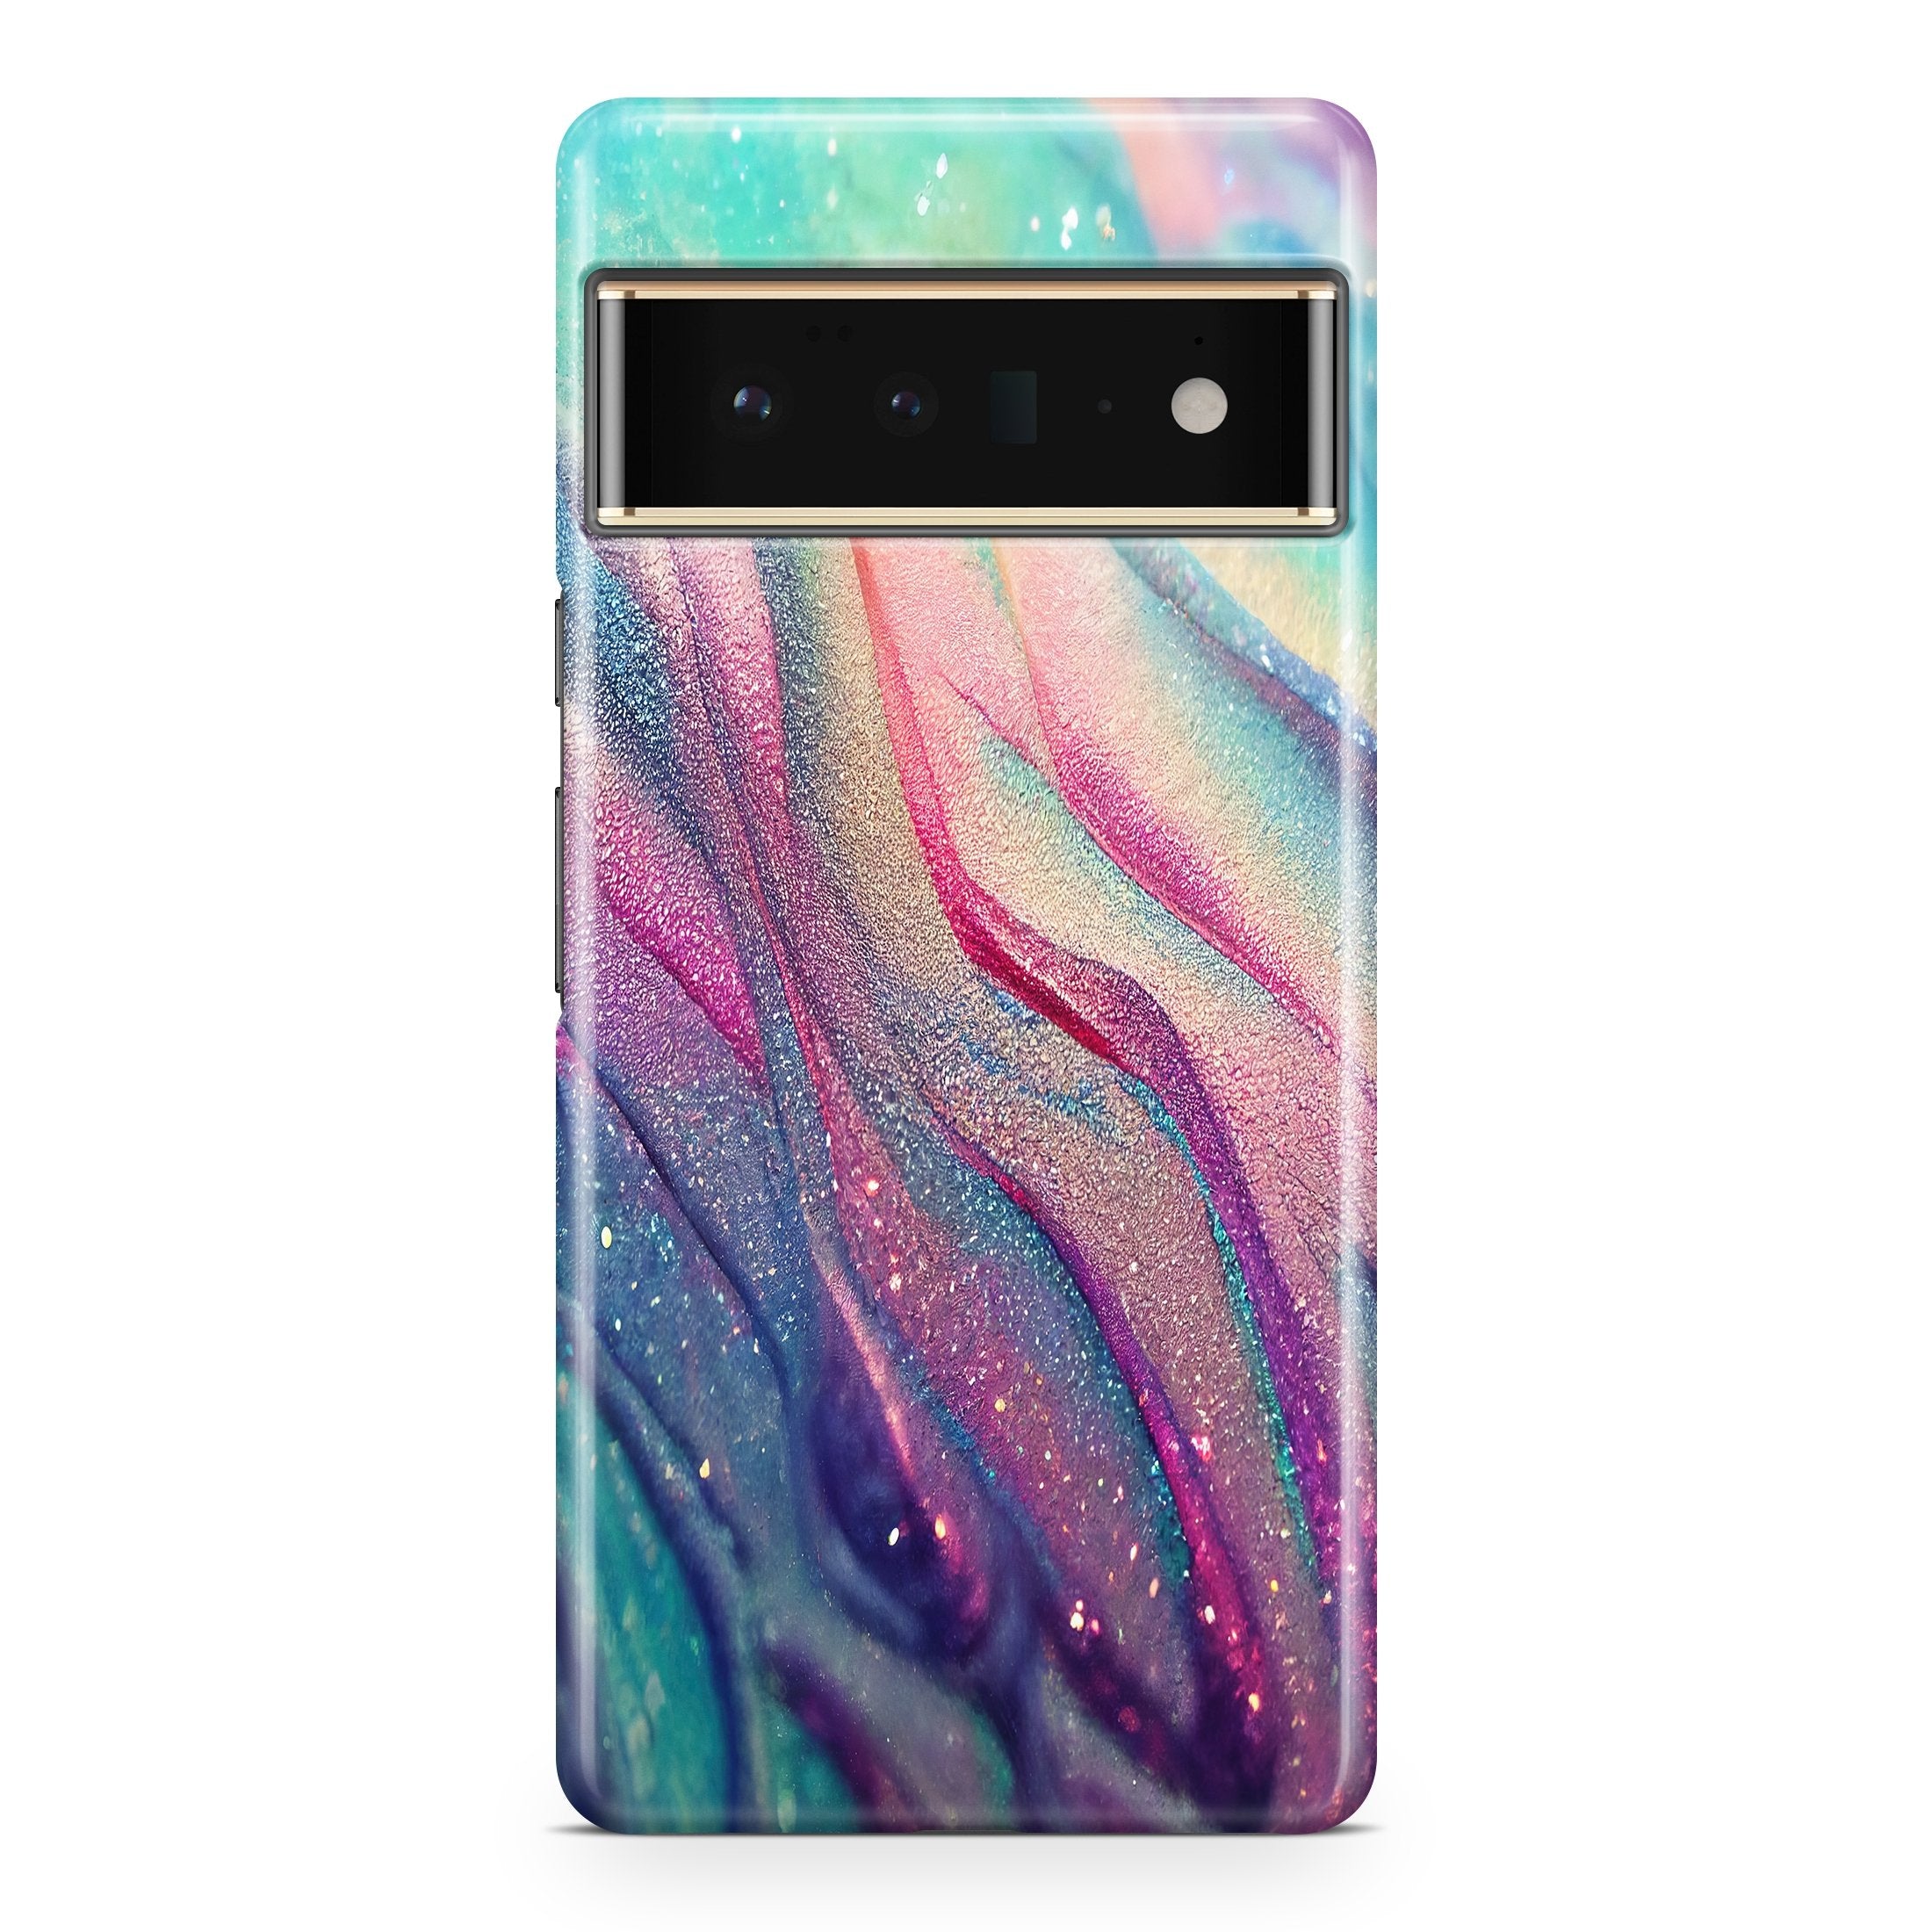 Tropical Sands - Google phone case designs by CaseSwagger